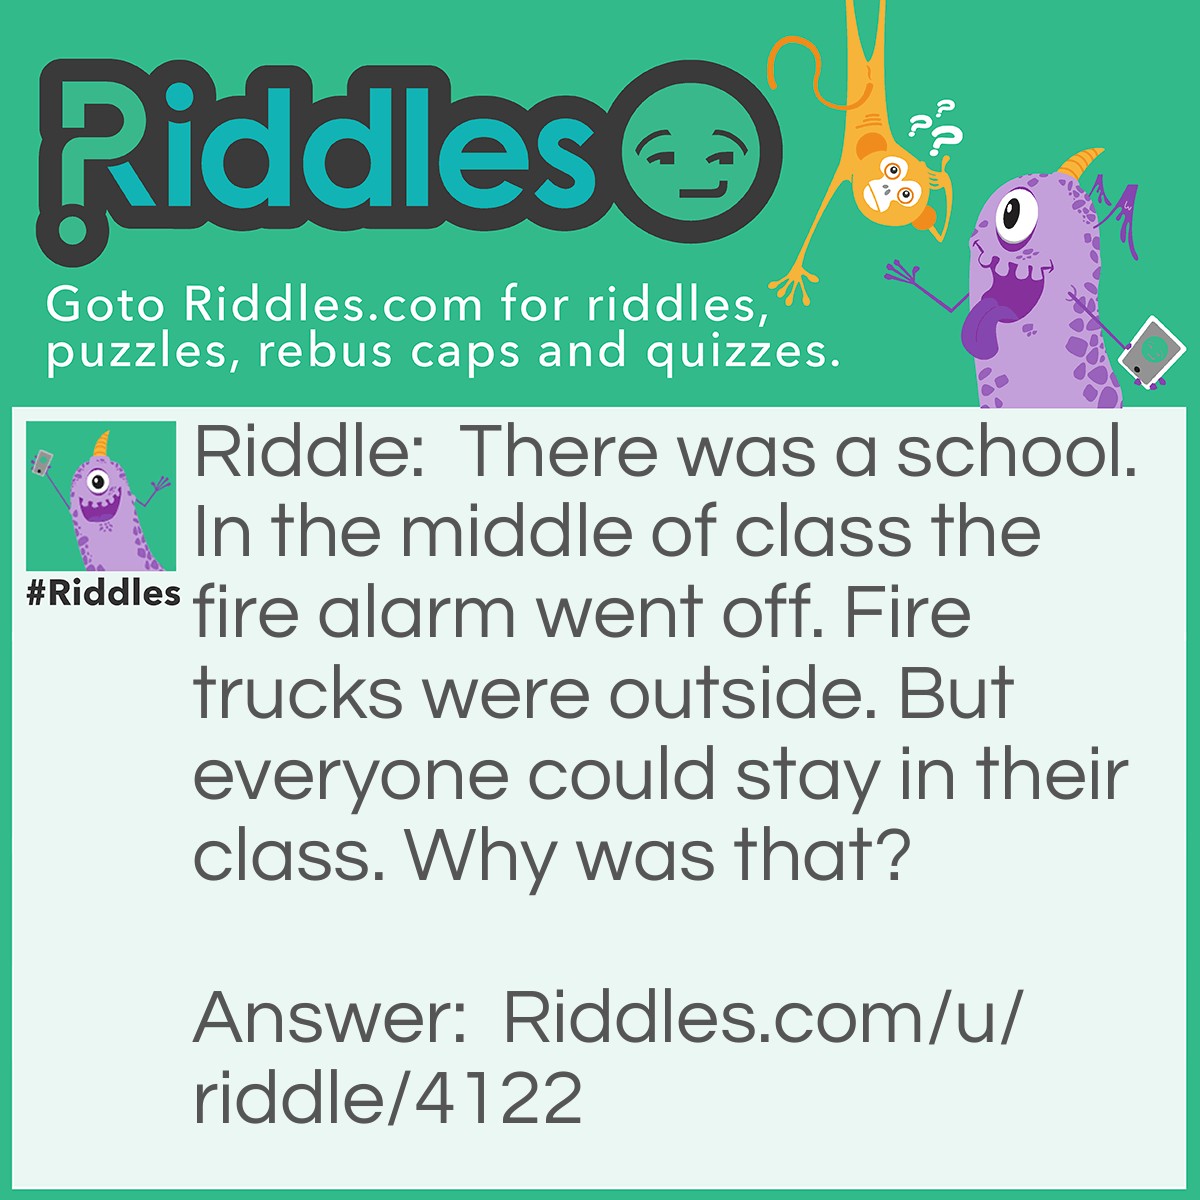 Riddle: There was a school. In the middle of class the fire alarm went off. Fire trucks were outside. But everyone could stay in their class. Why was that? Answer: The fire was outside. HA!